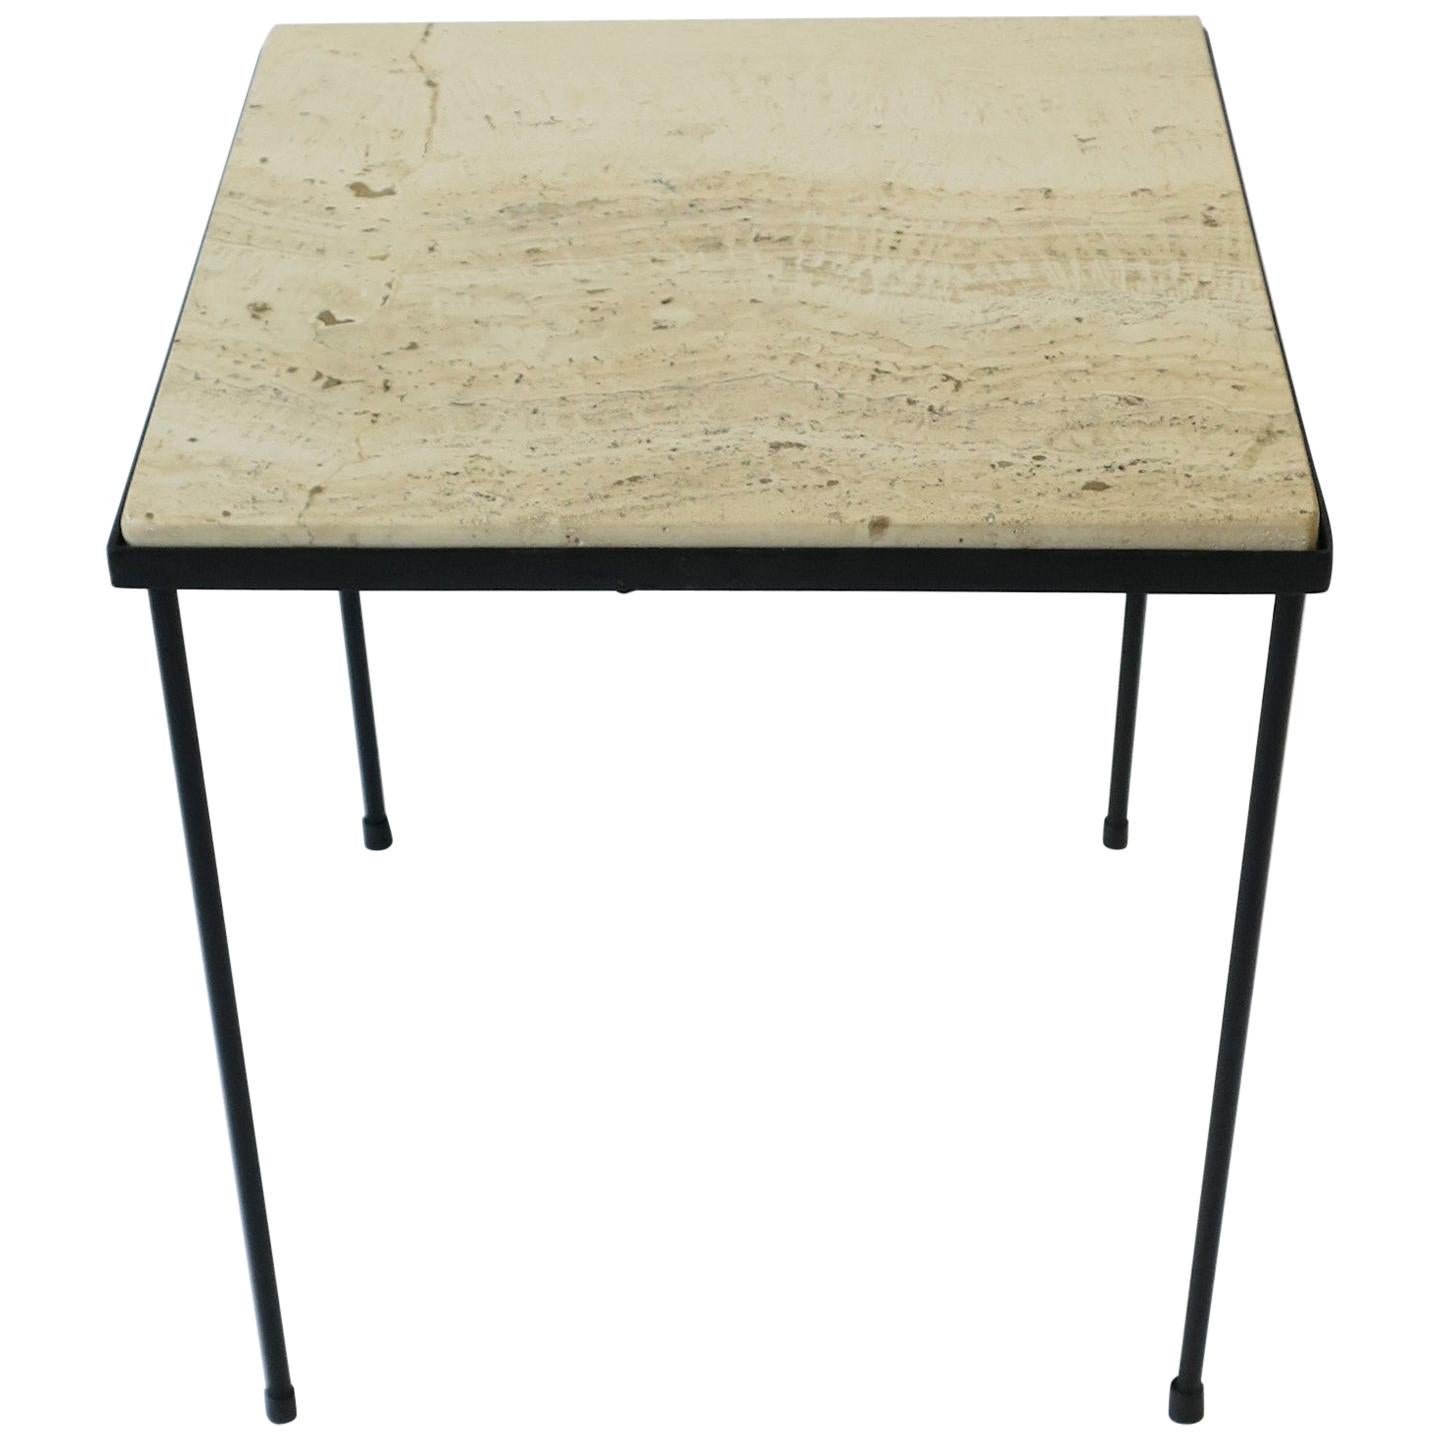 Italian Travertine Marble and Black Metal Square Side or End Table